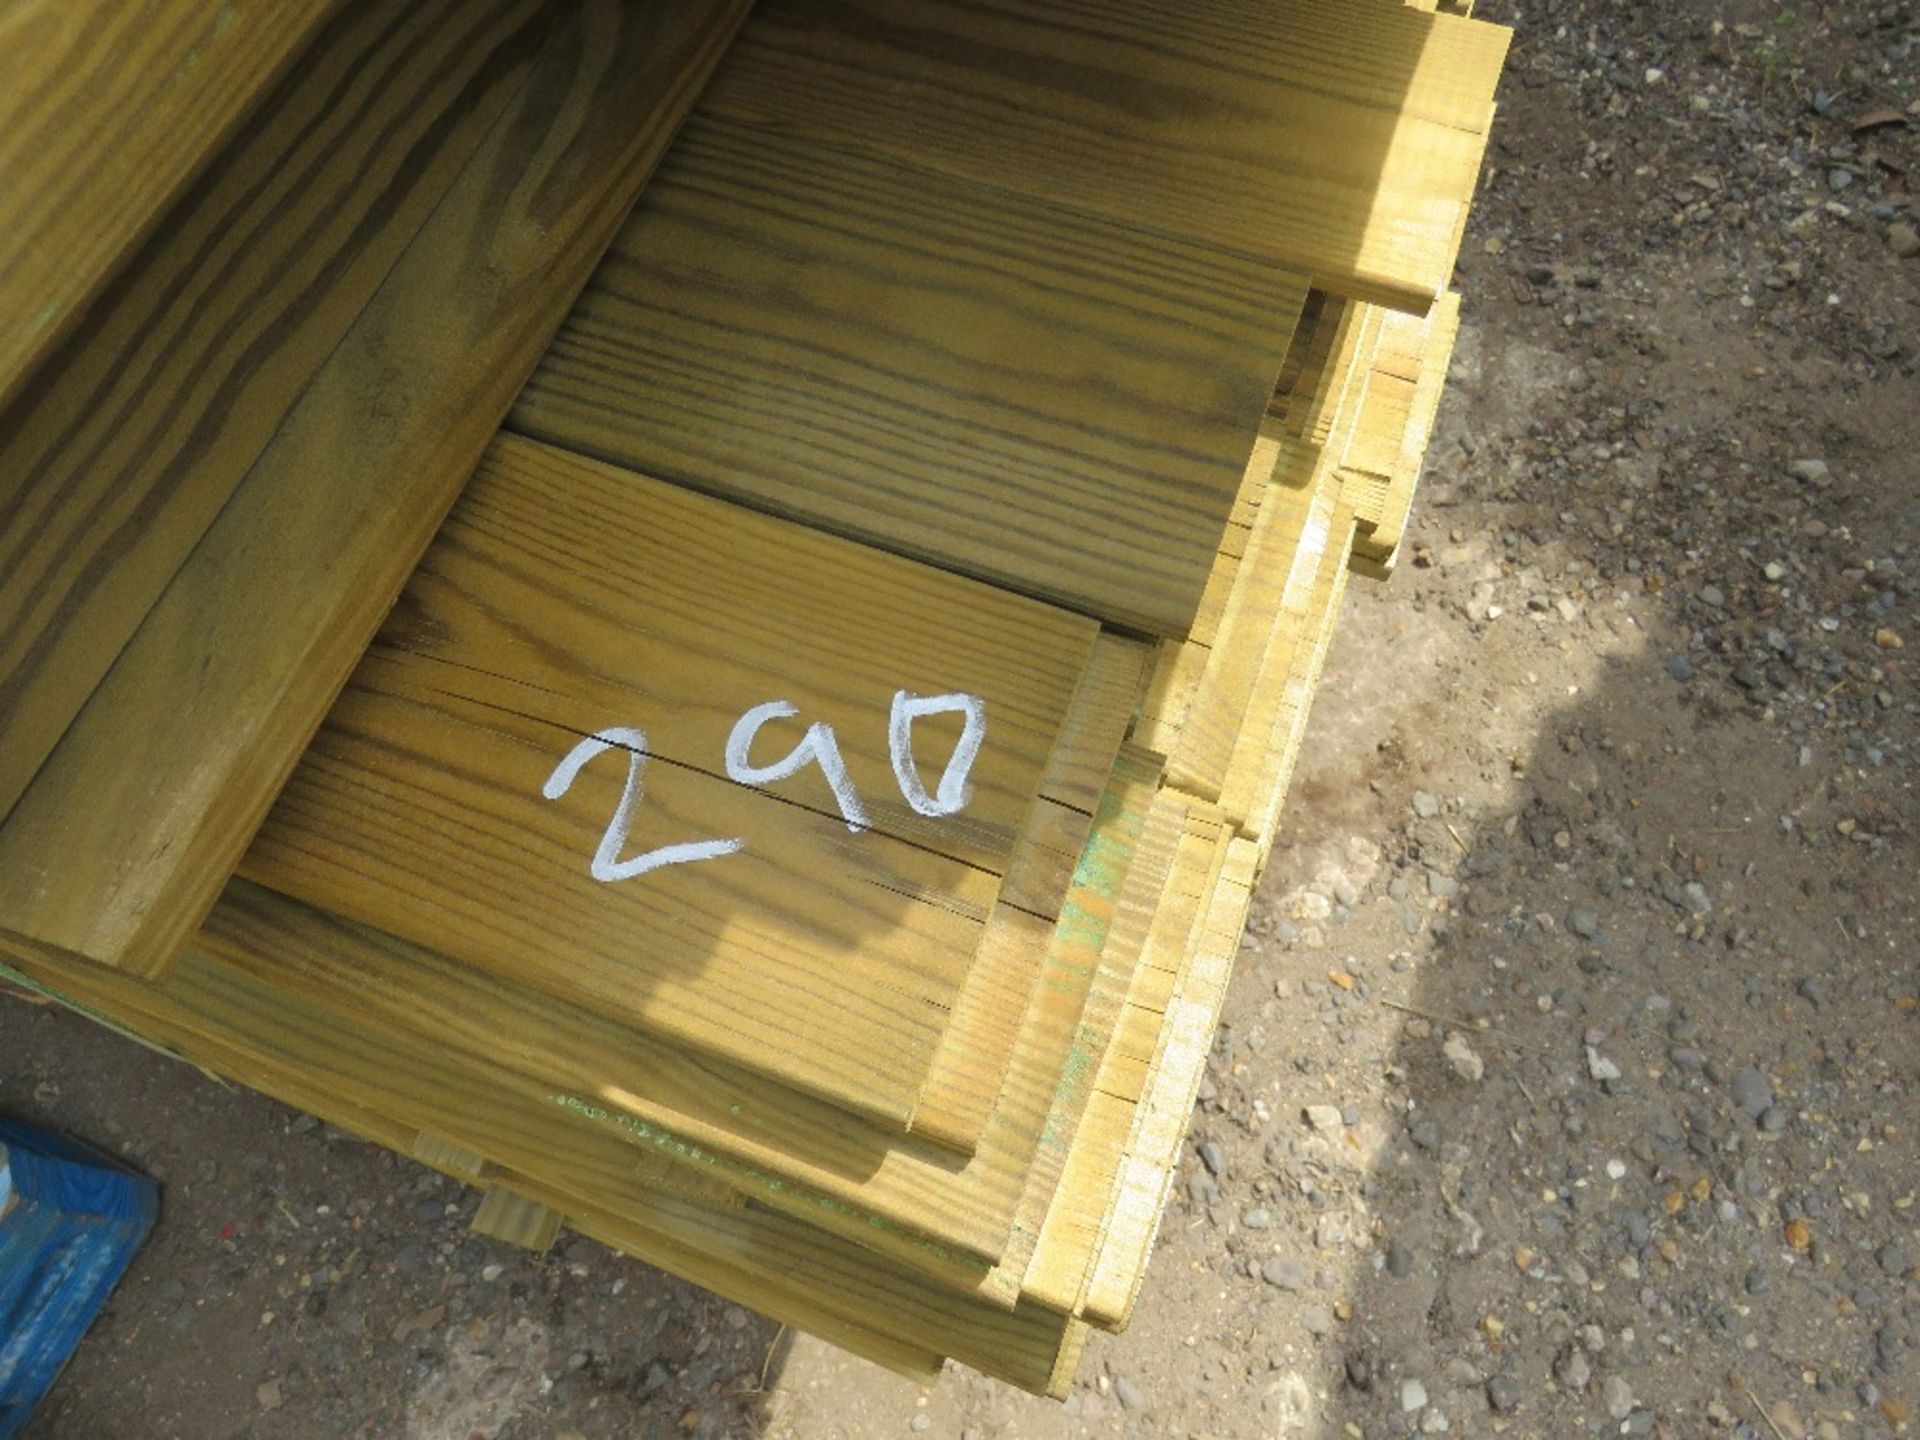 2 PACKS OF MACHINED FENCING CLADDING, 10CM WIDE, 1.75M LENGTH APPROX - Image 4 of 4